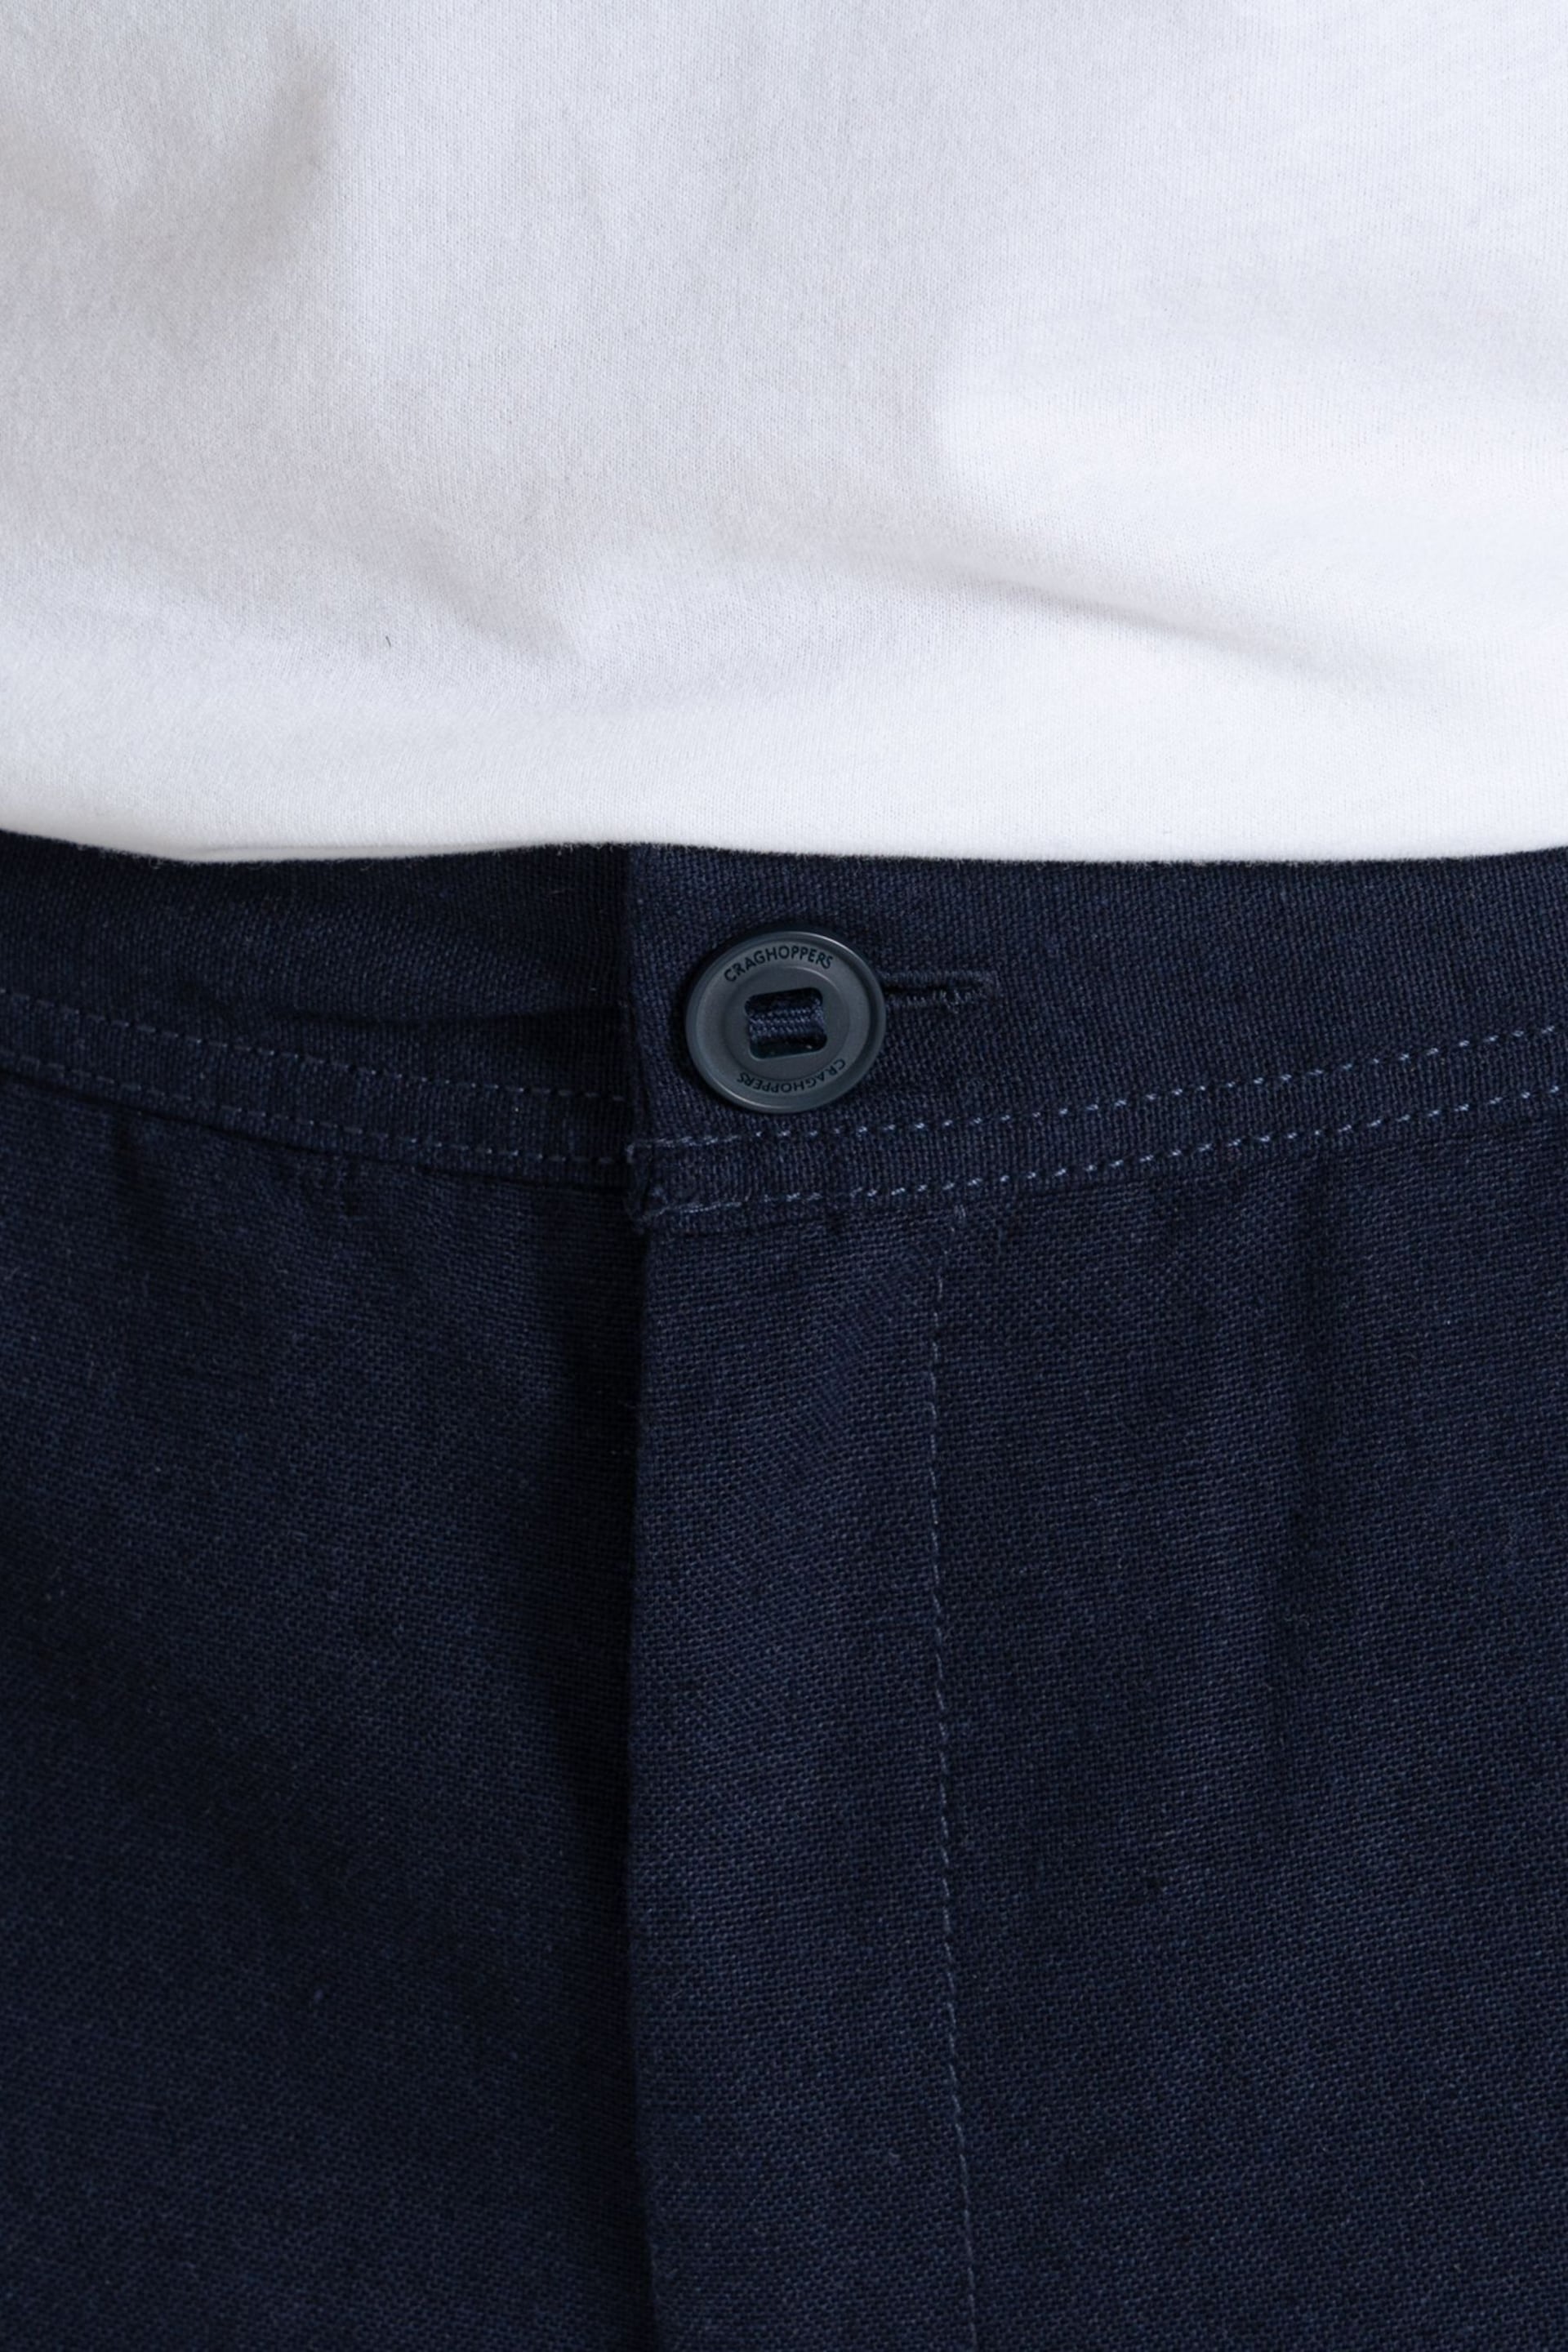 Craghoppers Blue Howle Shorts - Image 5 of 7